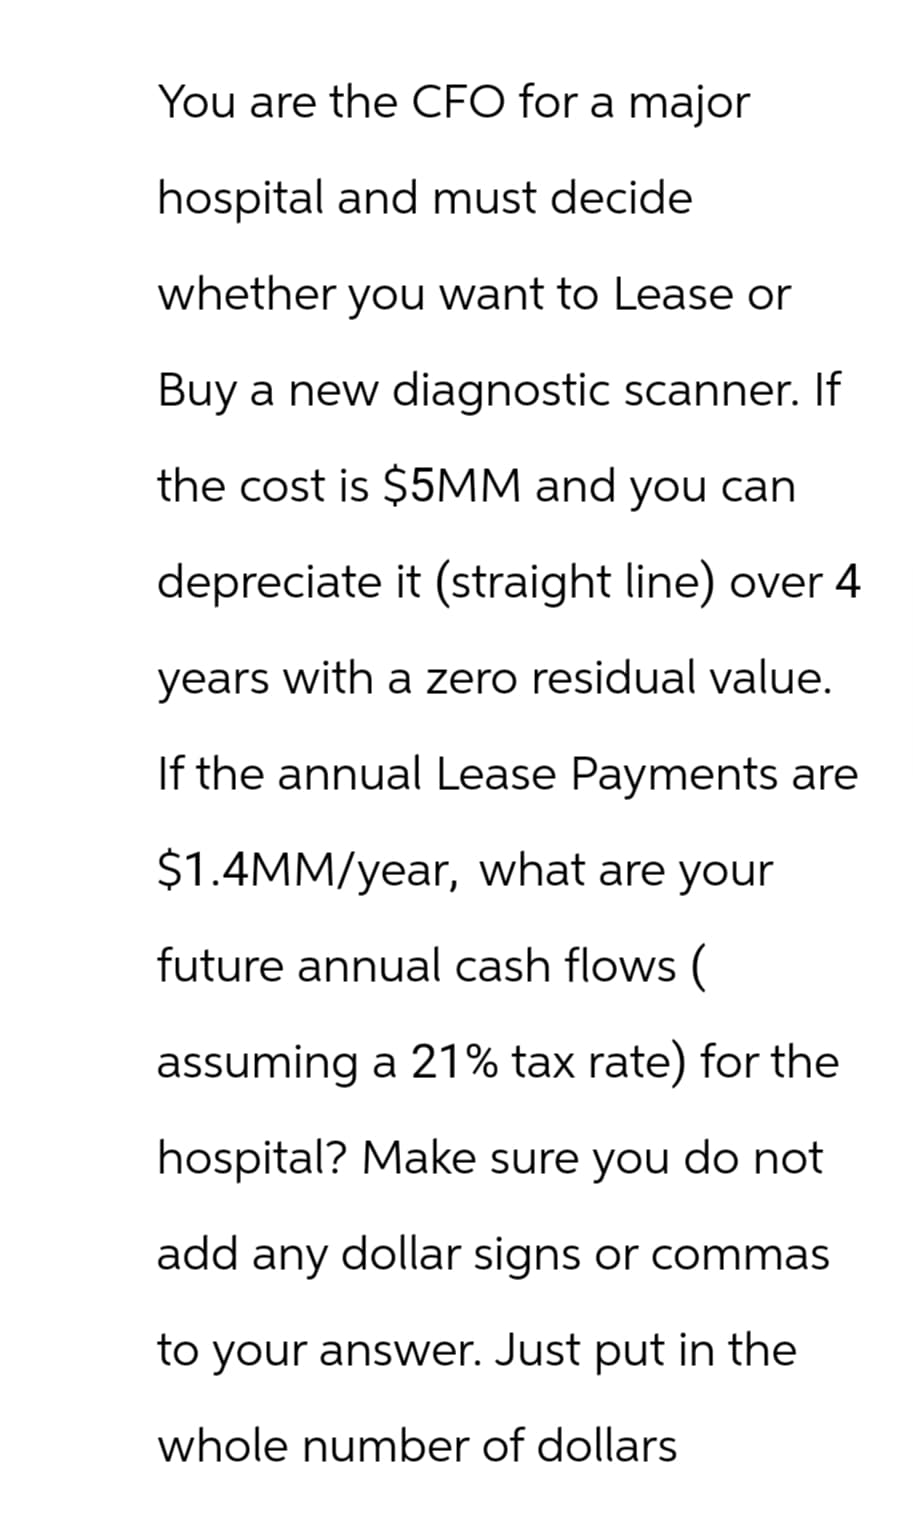 You are the CFO for a major
hospital and must decide
whether you want to Lease or
Buy a new diagnostic scanner. If
the cost is $5MM and you can
depreciate it (straight line) over 4
years with a zero residual value.
If the annual Lease Payments are
$1.4MM/year, what are your
future annual cash flows (
assuming a 21% tax rate) for the
hospital? Make sure you do not
add any dollar signs or commas
to your answer. Just put in the
whole number of dollars